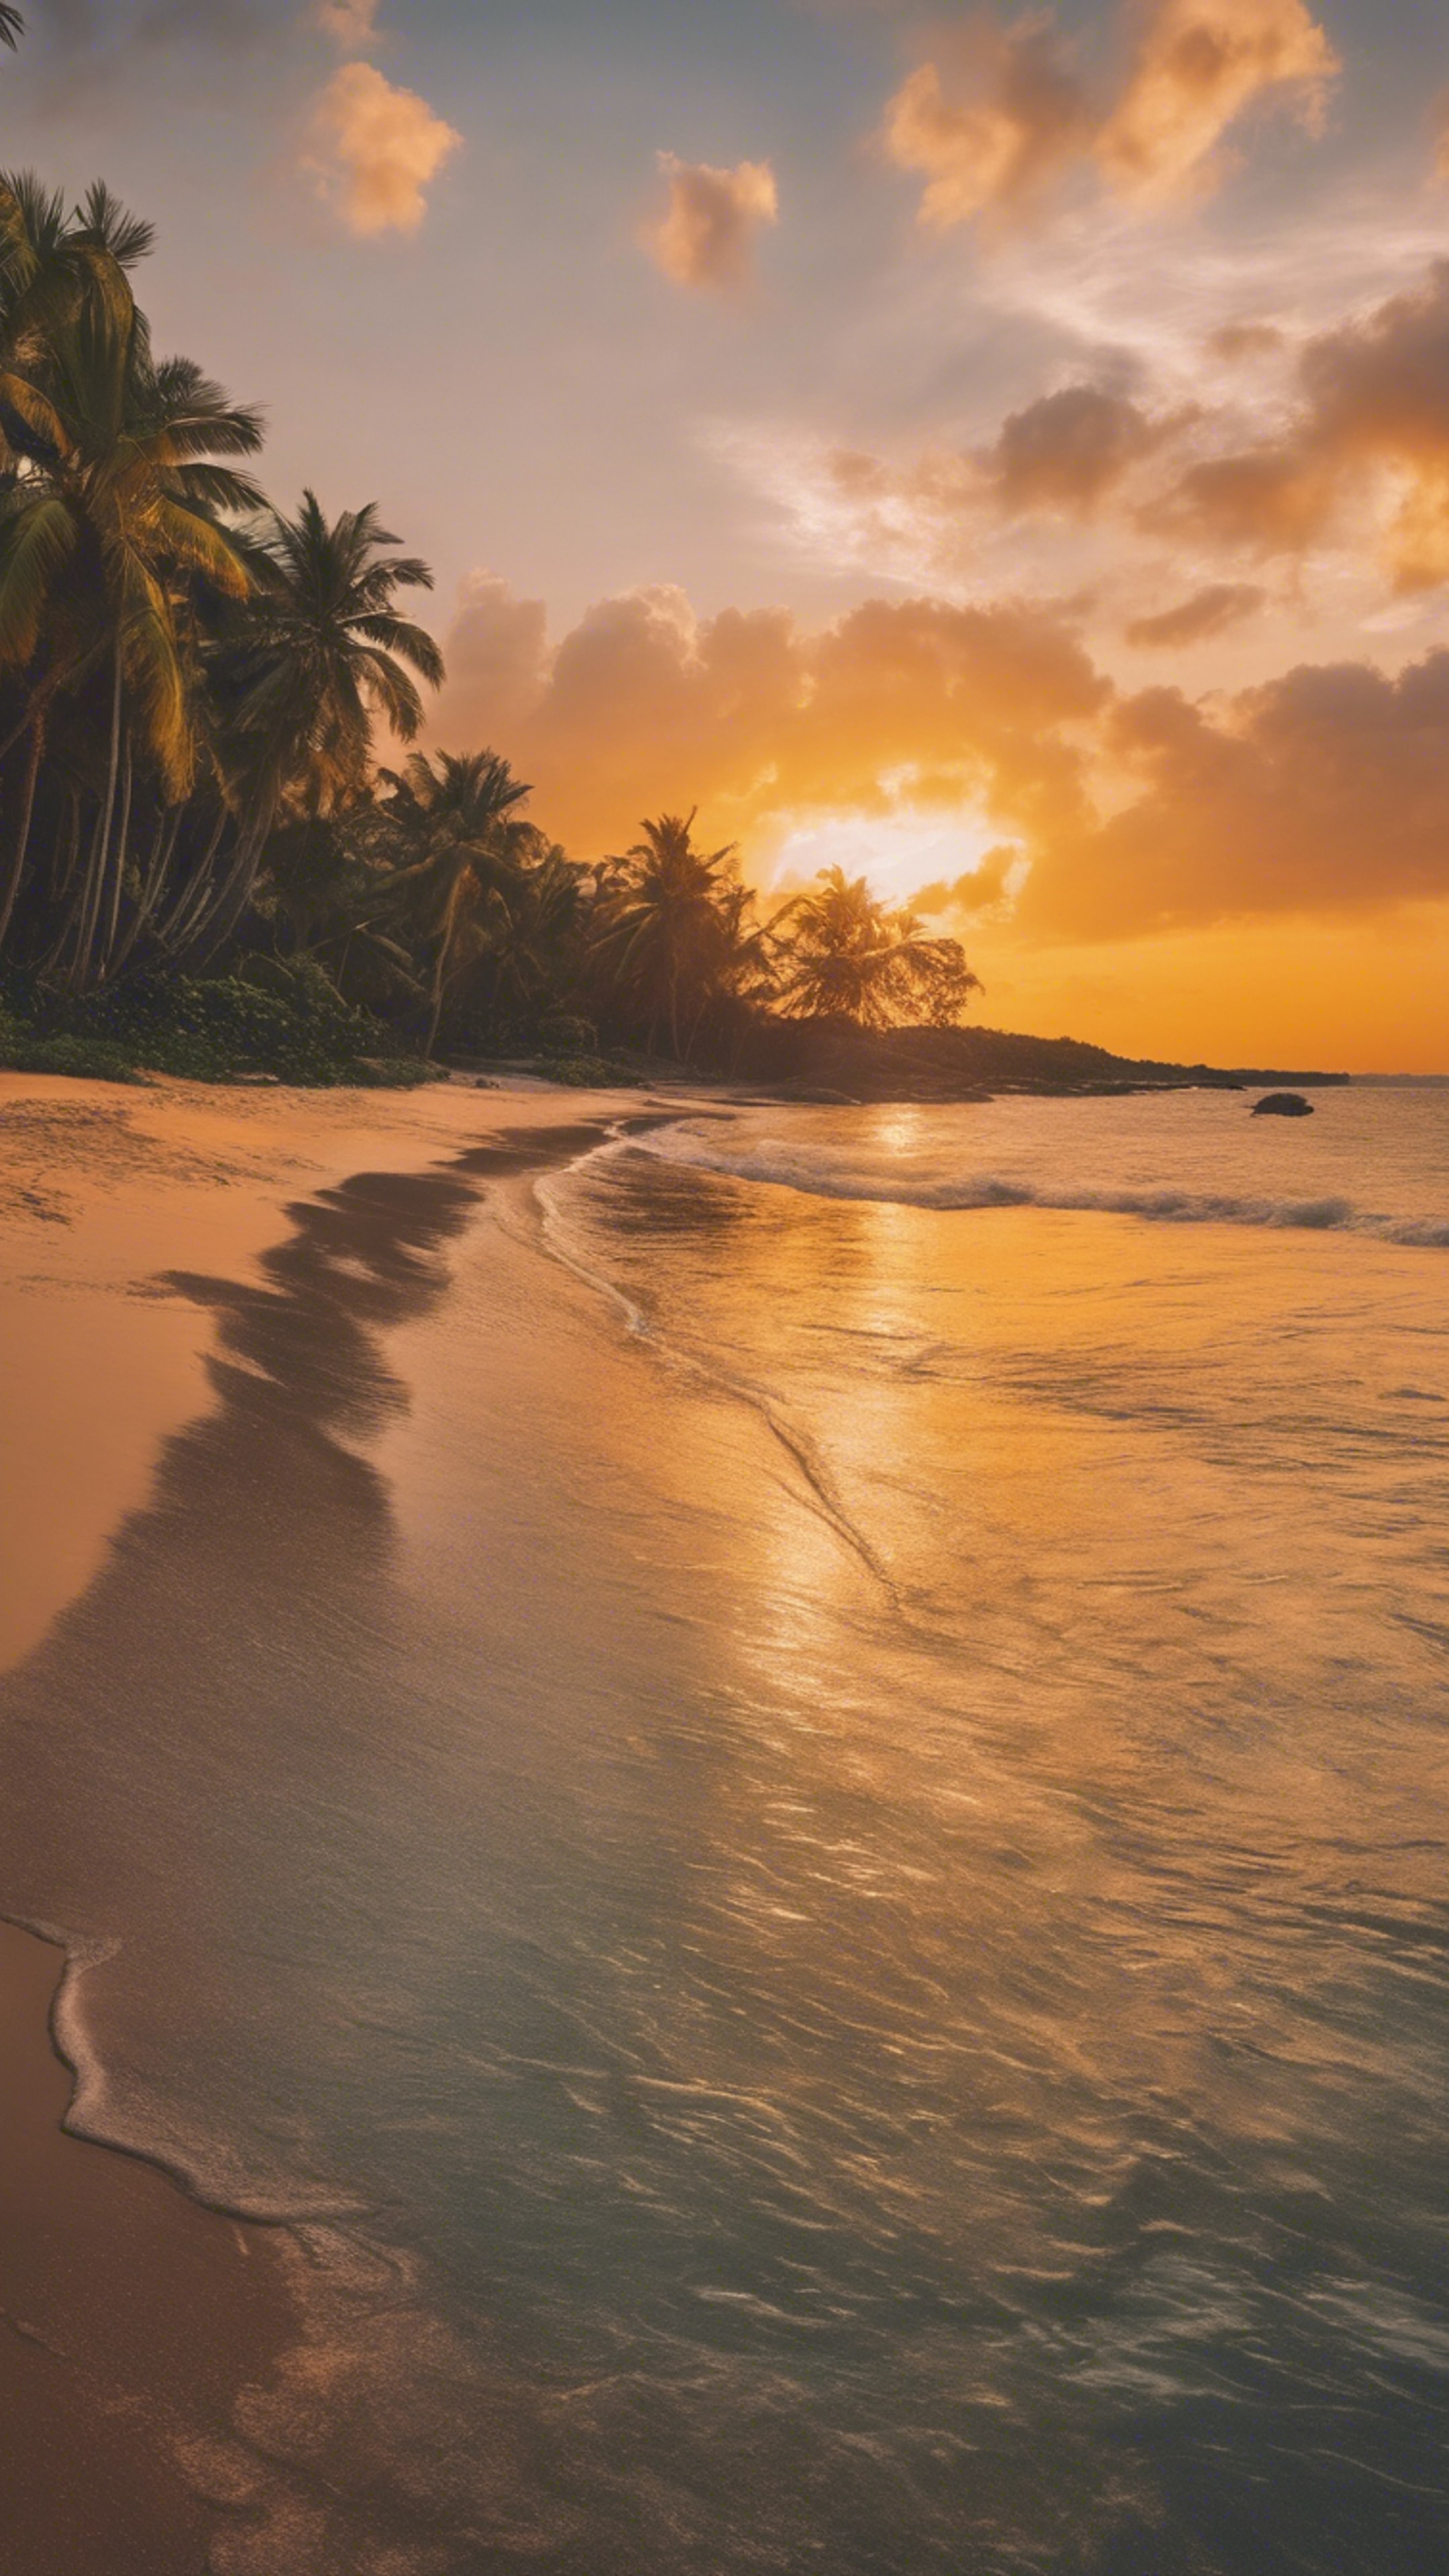 A tropical beach at sunset with hues of orange and yellow gently reflecting on the clear water. Sfondo[f1cd0a05f1594f21a6bf]